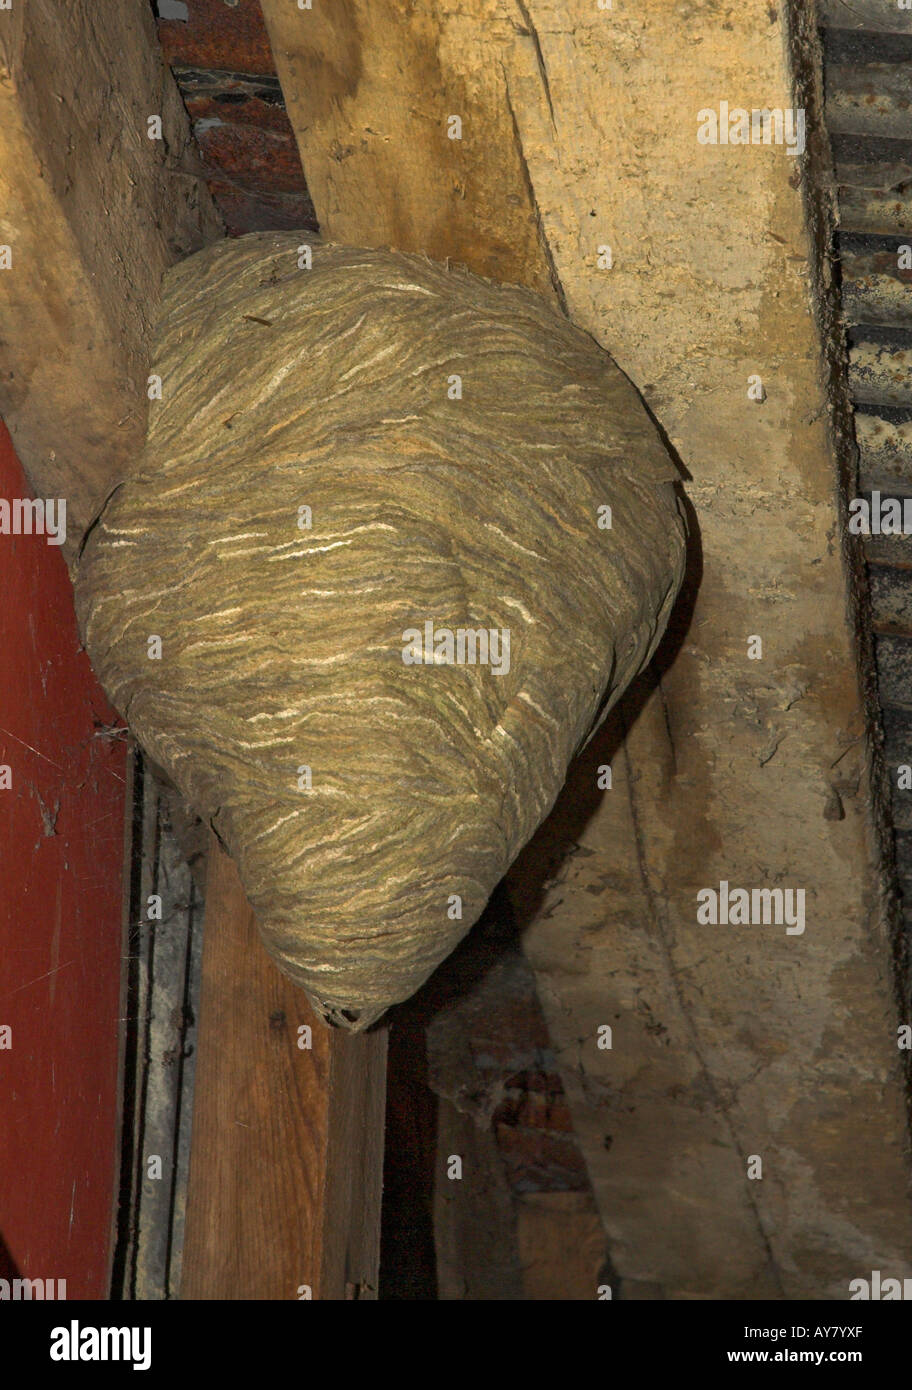 Wasp nest in barn. Stock Photo